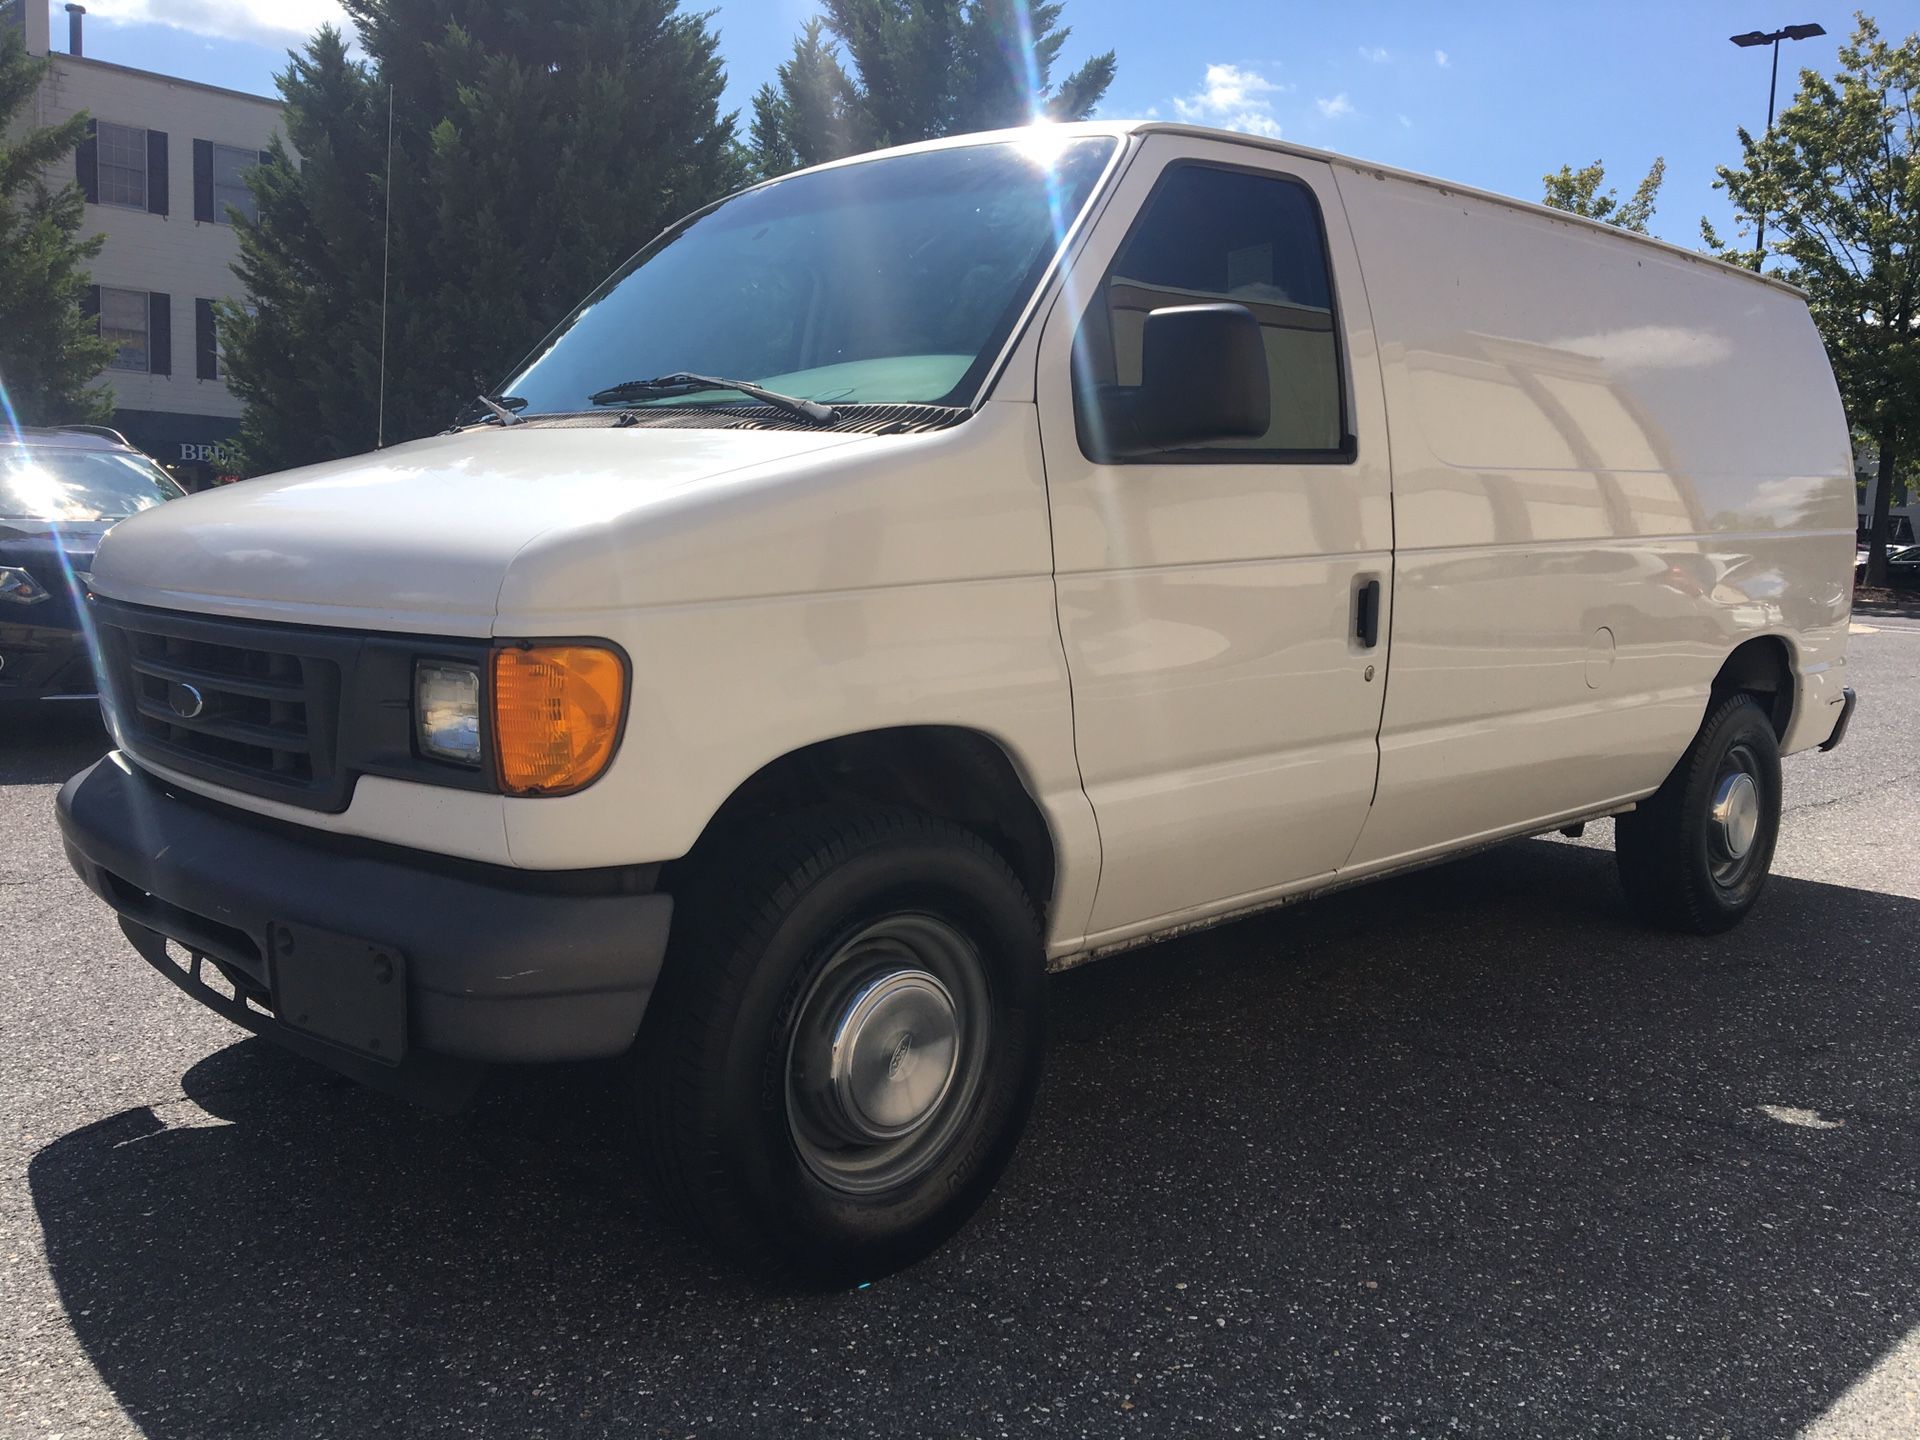 2000 Ford E3 50 cargo van looks and runs great ladder racks and work shelves runs and drives great no problems